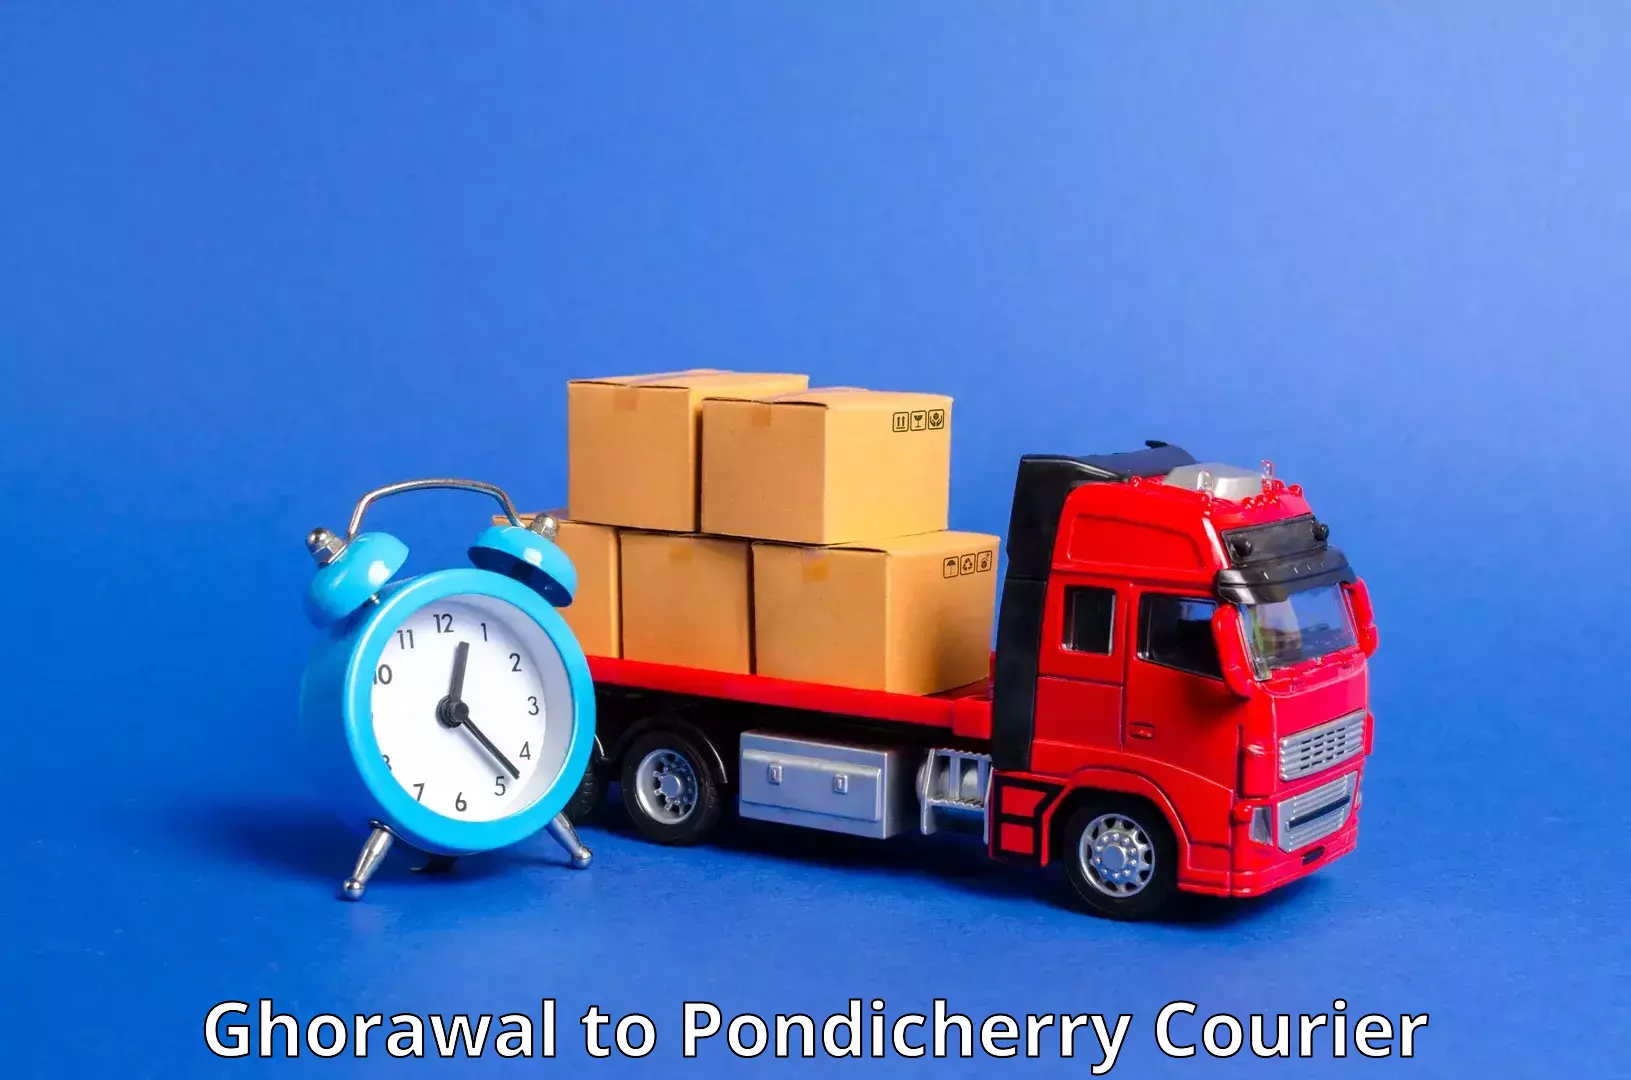 Cash on delivery service Ghorawal to Pondicherry University